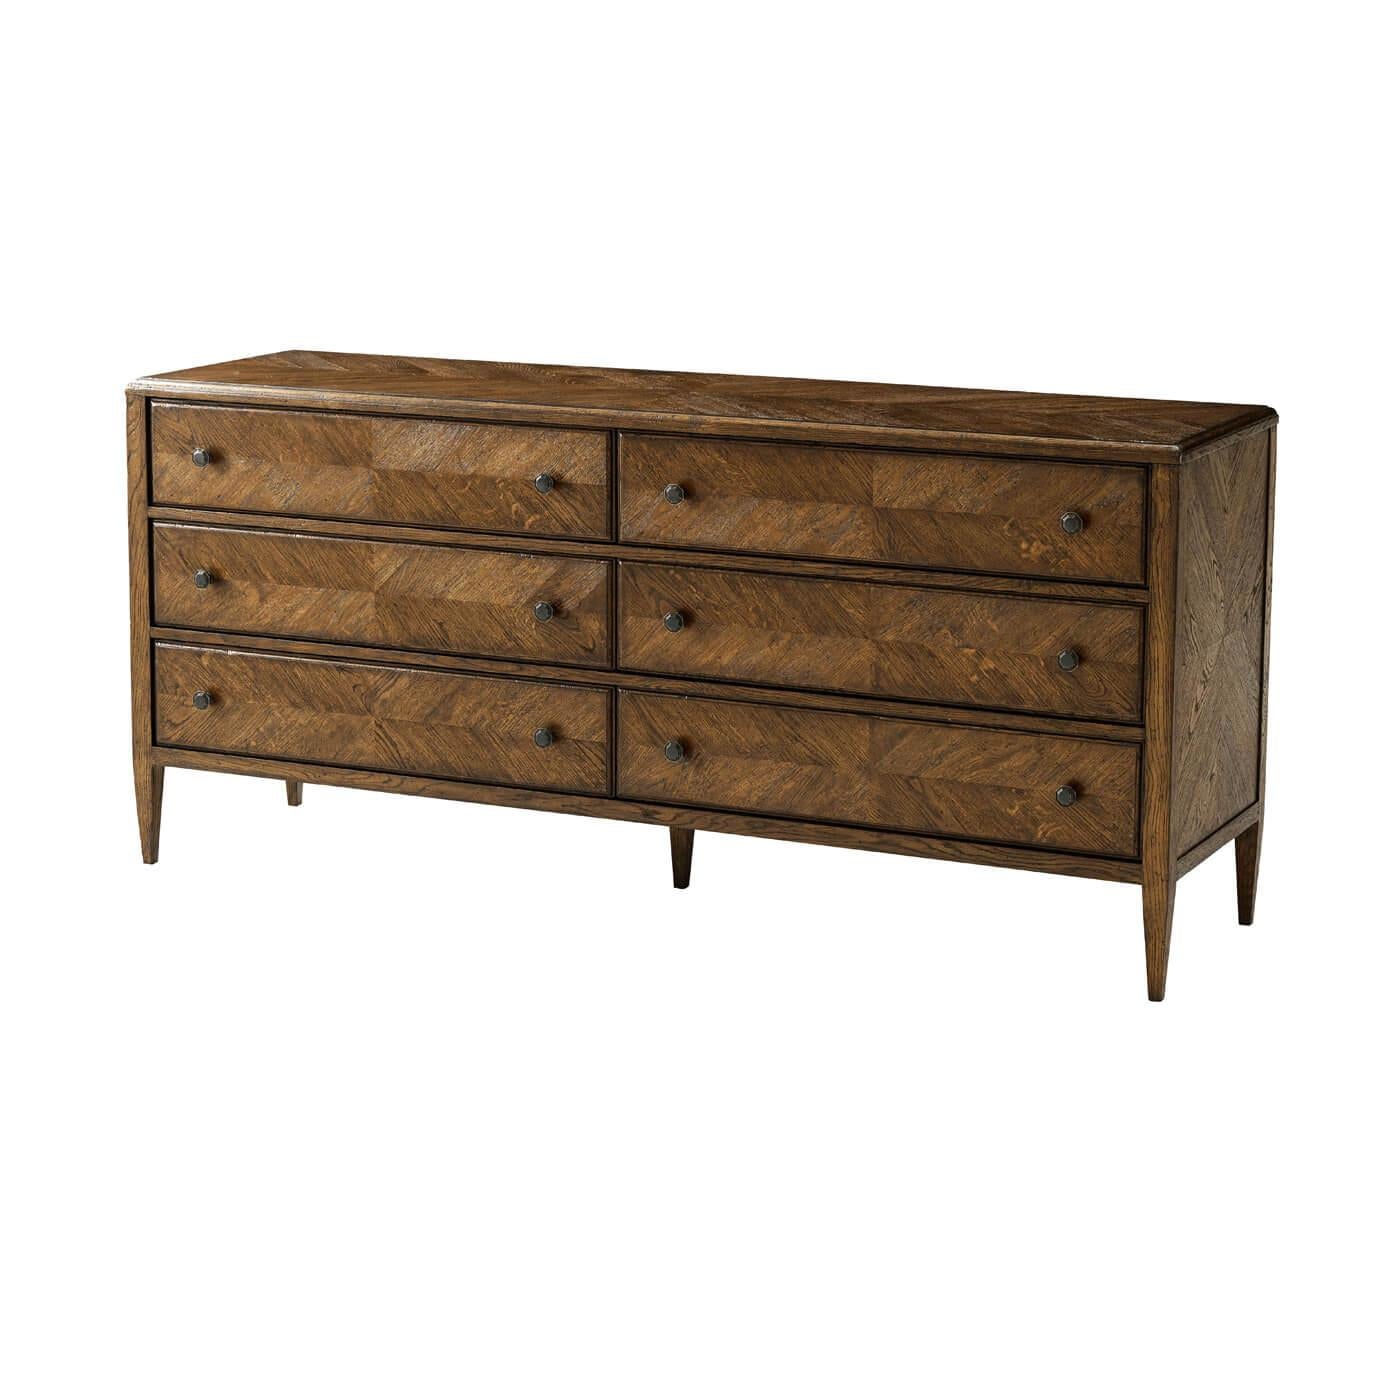 A dark oak parquetry six-drawer dresser in Dusk finish. This beautiful hand-carved oak dresser includes six drawers with mirrored herringbone starburst parquetry finished with Verde Bronze handles on classically tapered oak legs. A perfect dresser